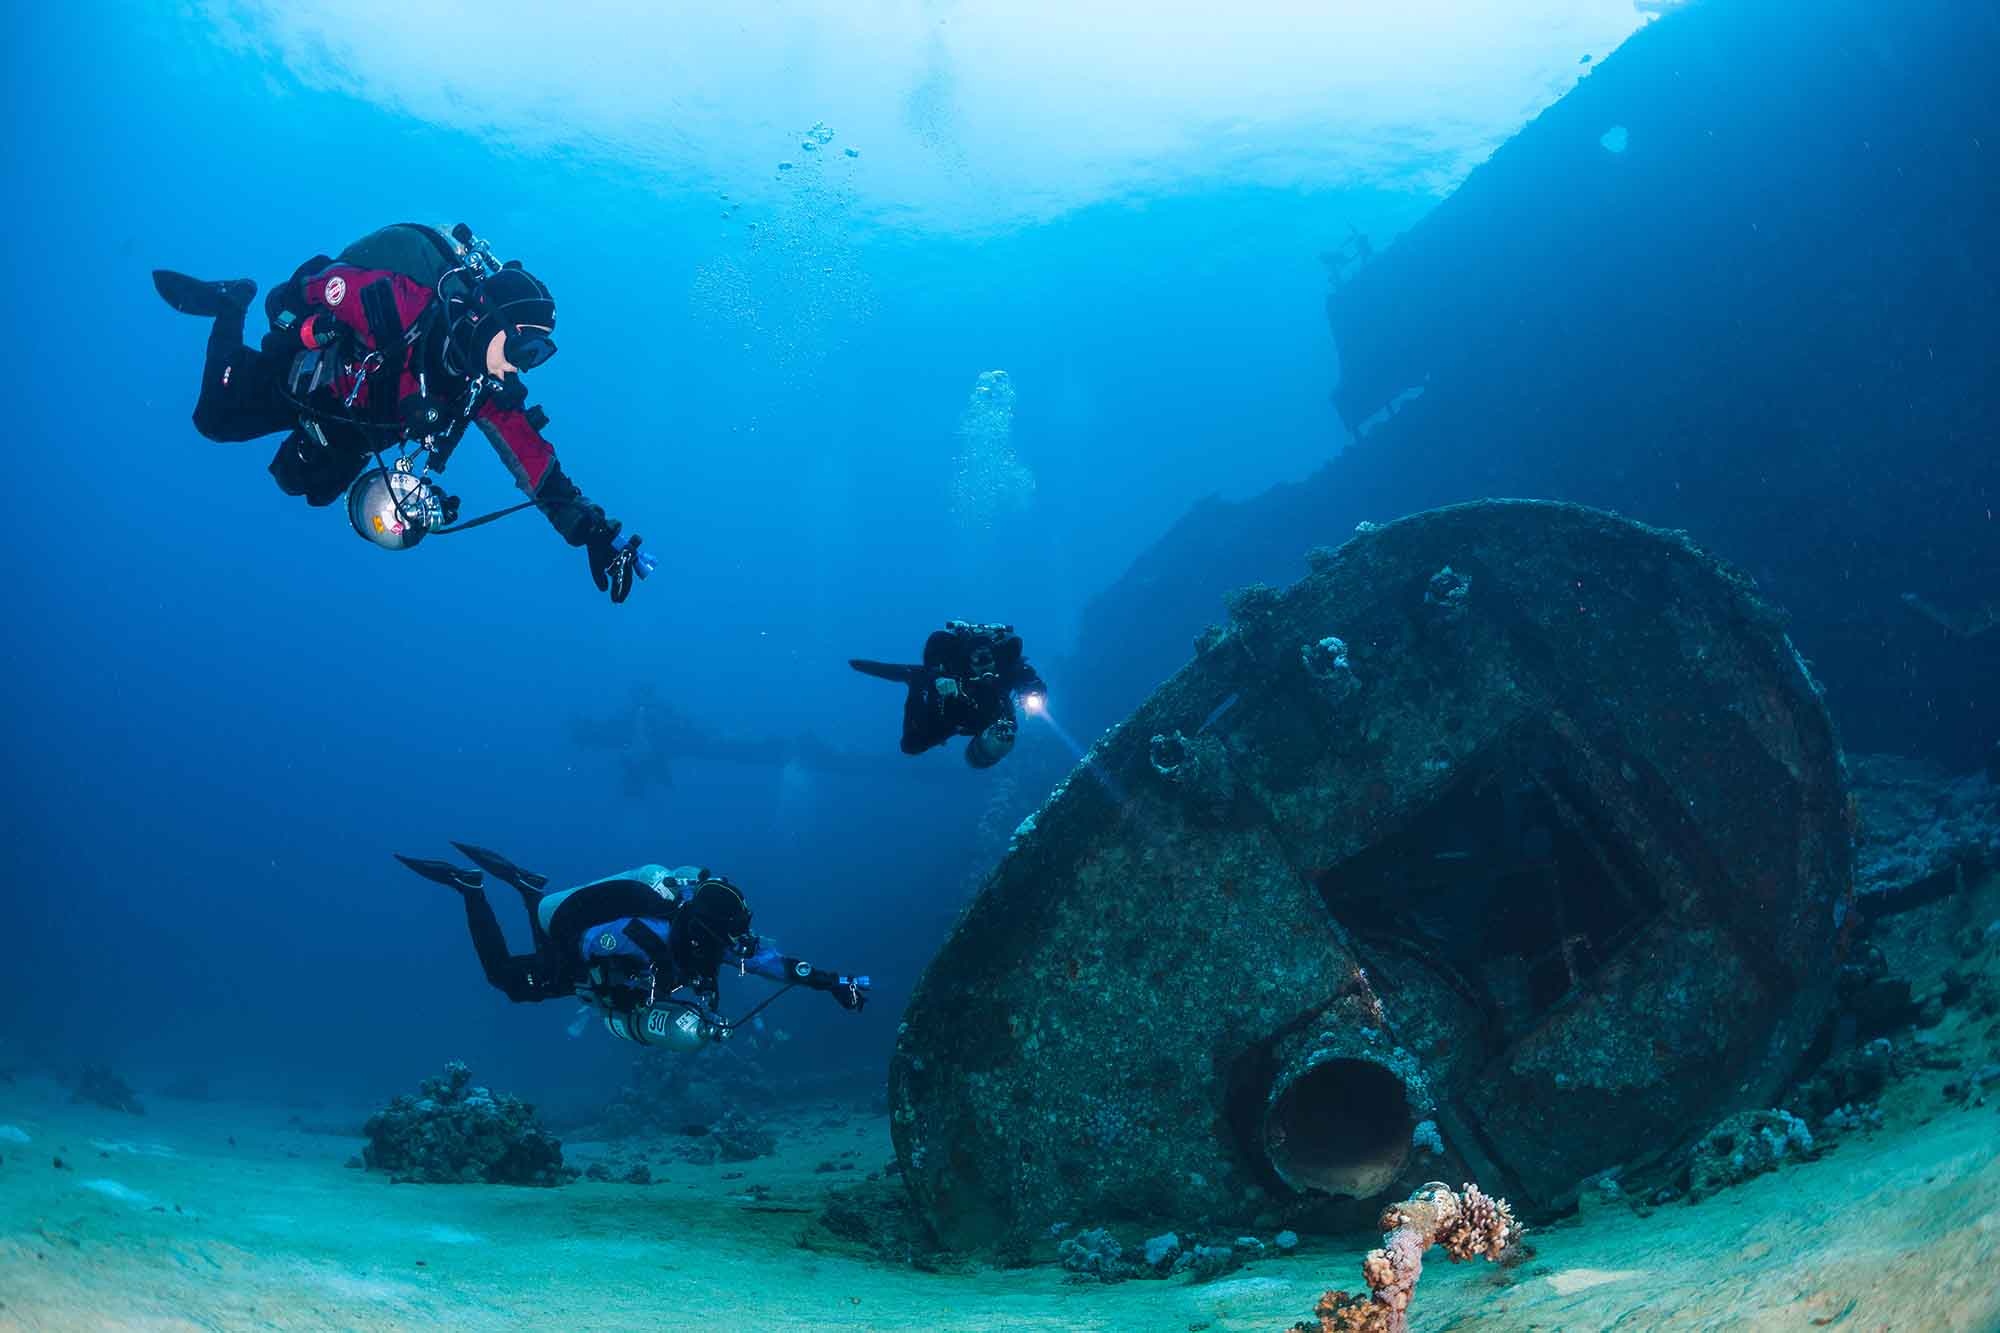 Diving: A group of divers explores a wrecked ship, Adventurous underwater activity. 2000x1340 HD Wallpaper.